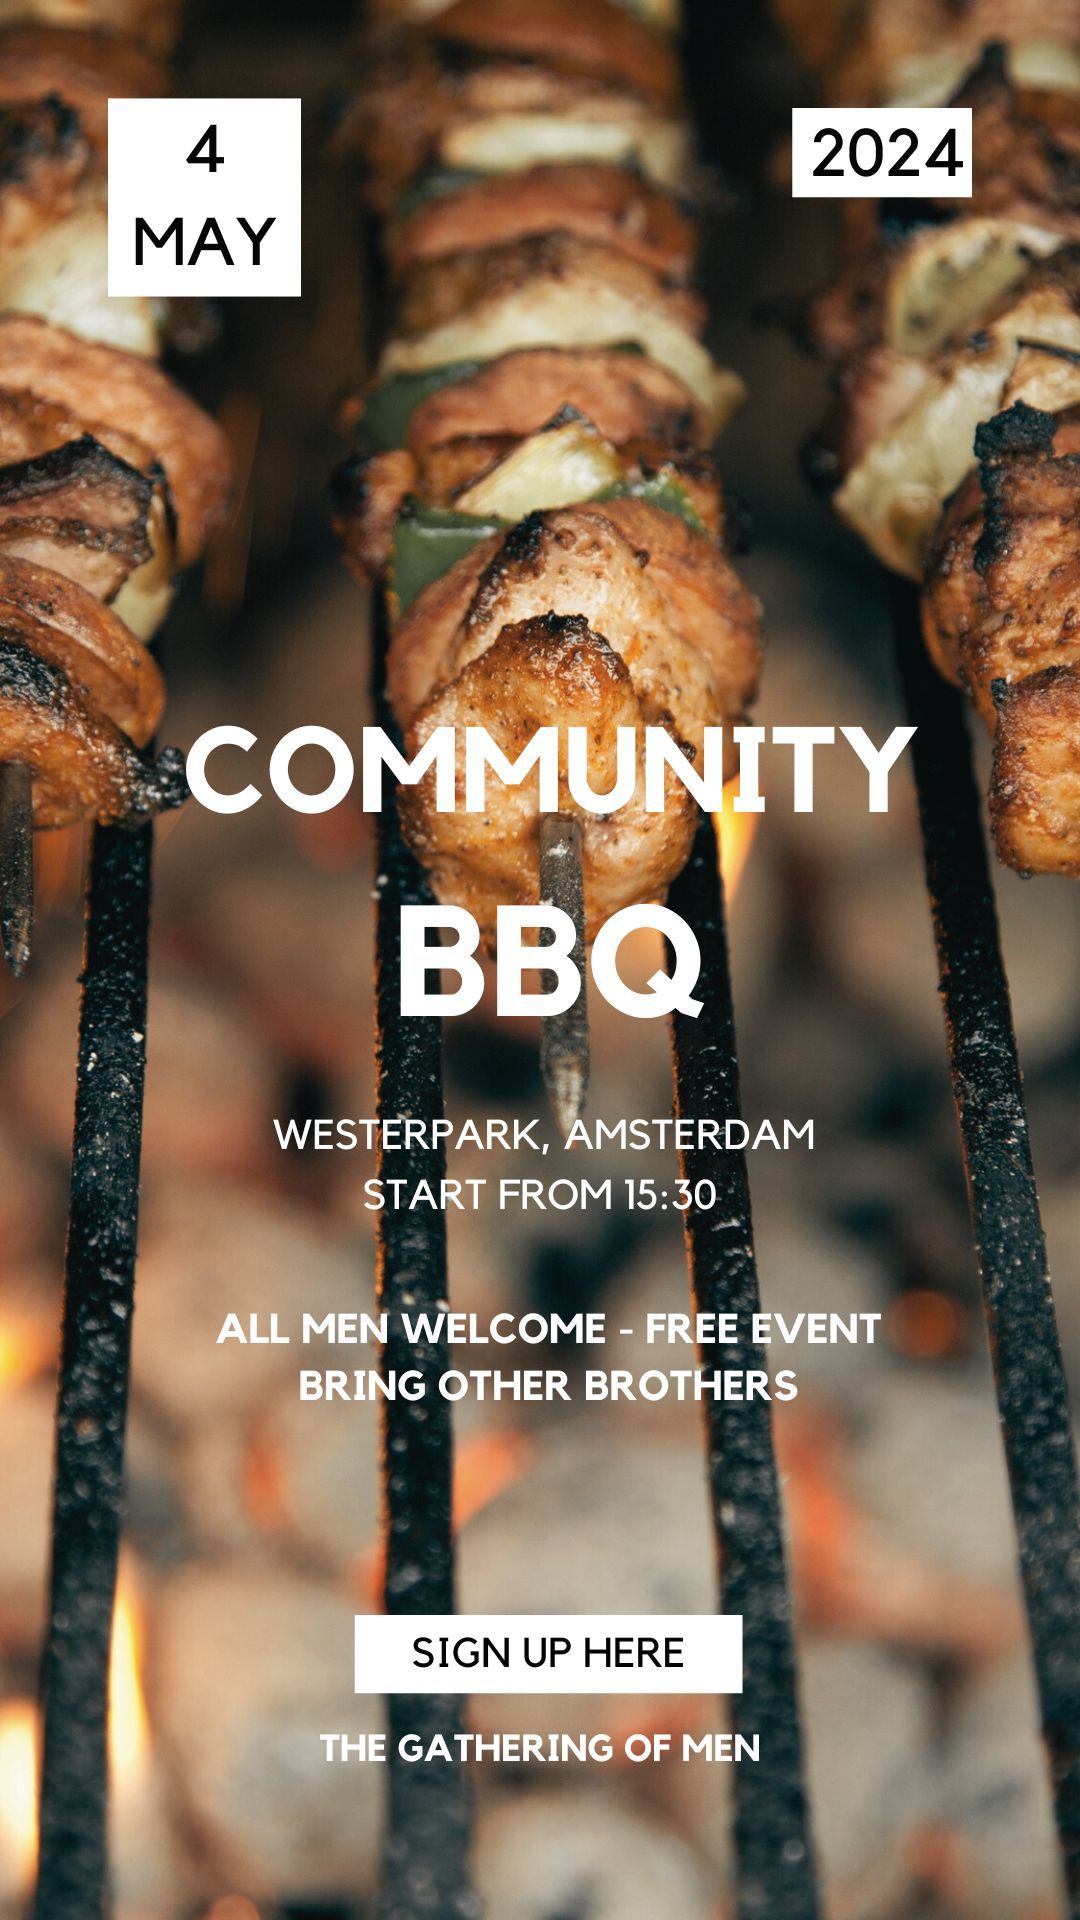 Community BBQ for the men in Amsterdam